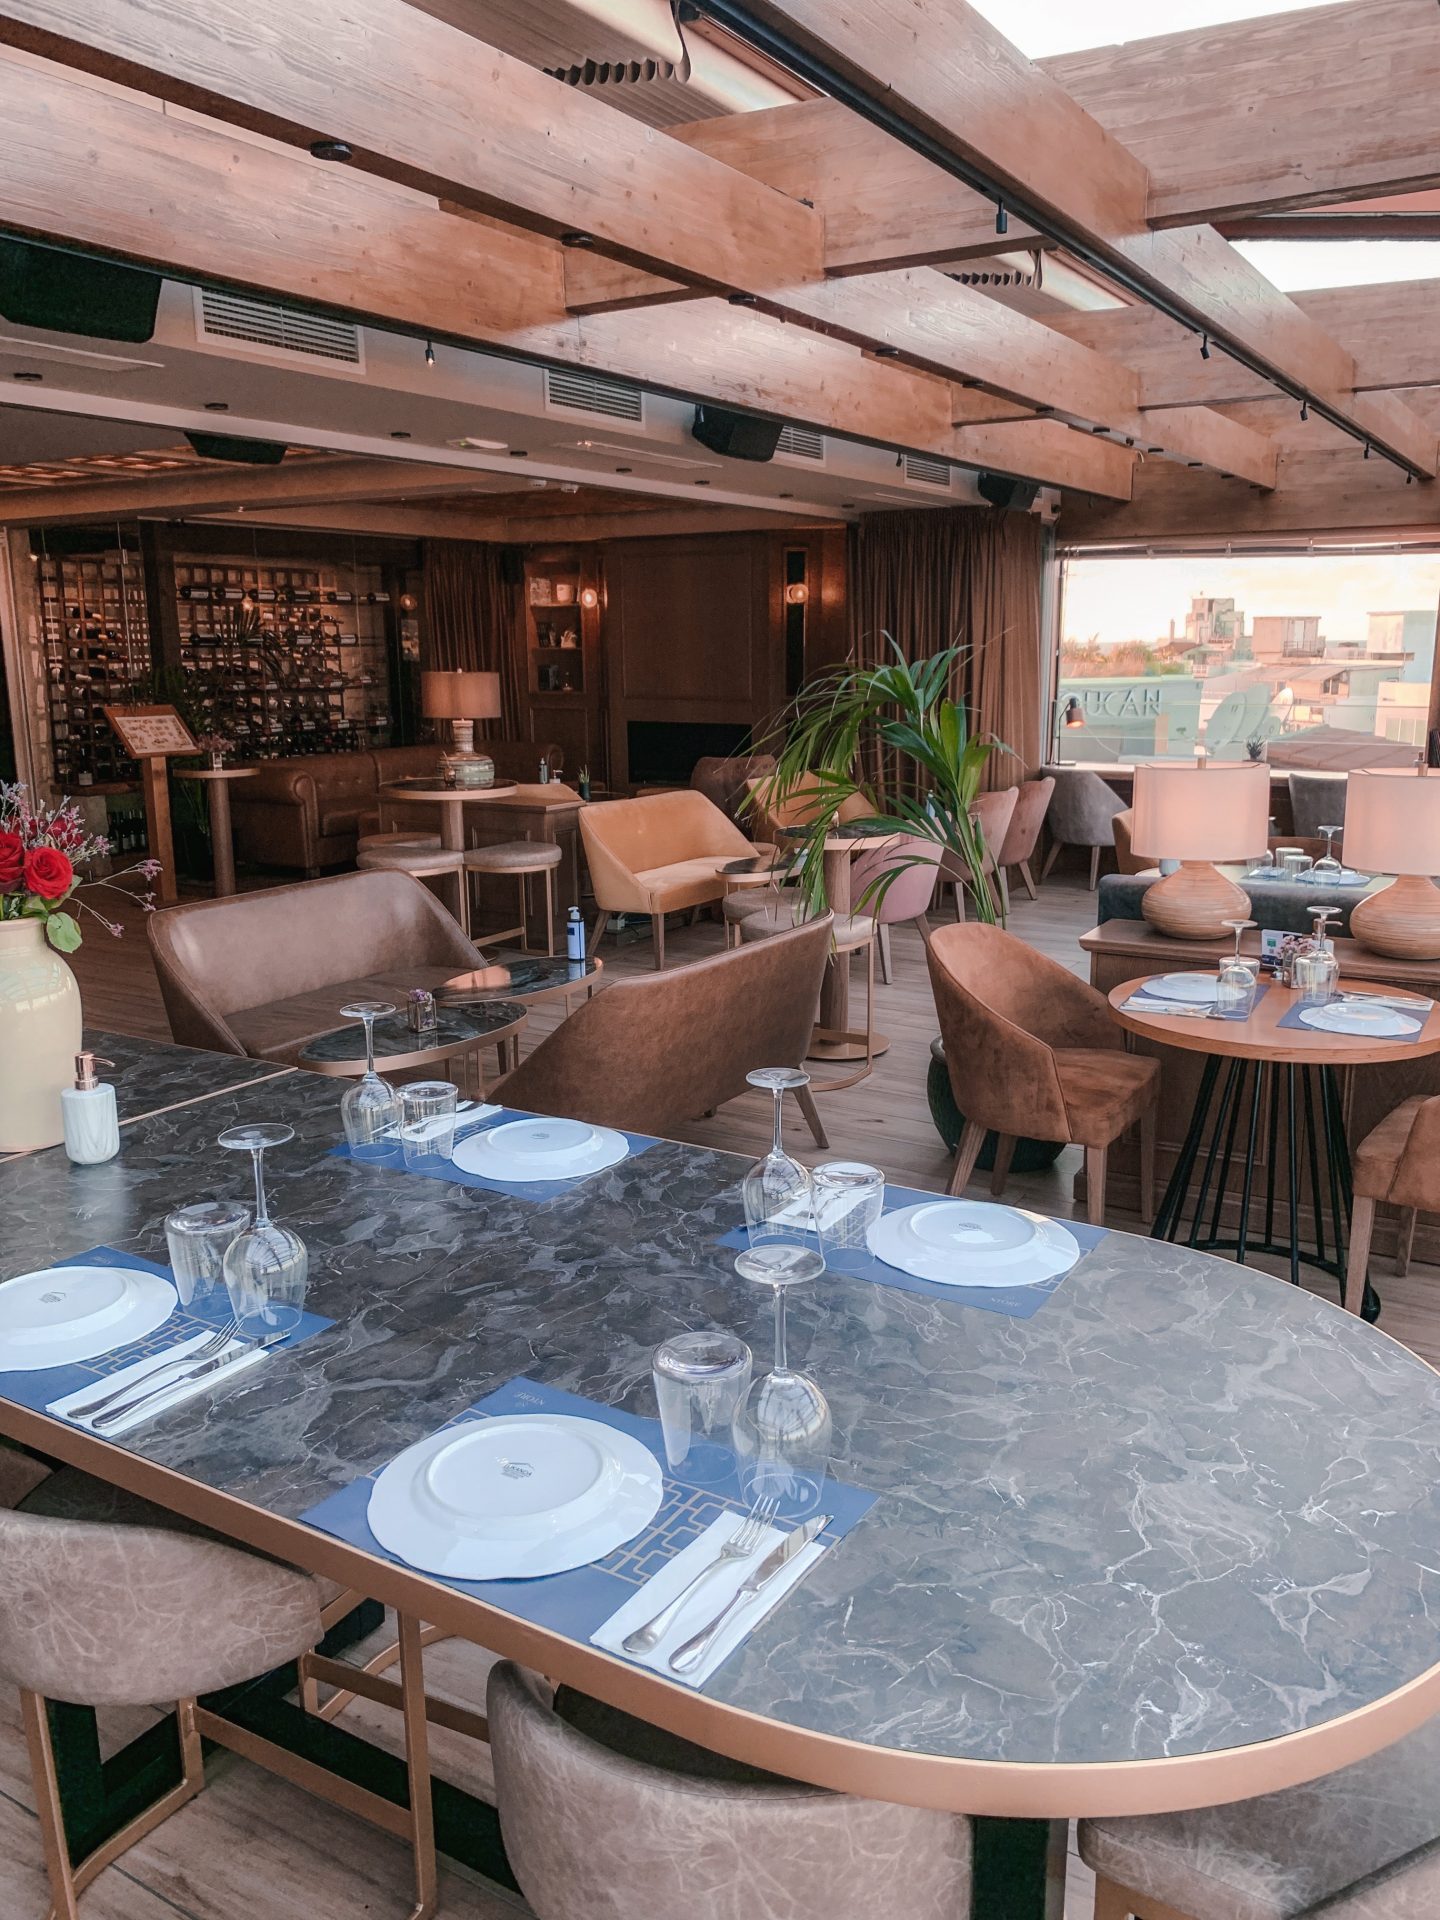 NTORE, fine rooftop restaurant and bar, with an amazing view of the city center and the port of Heraklion